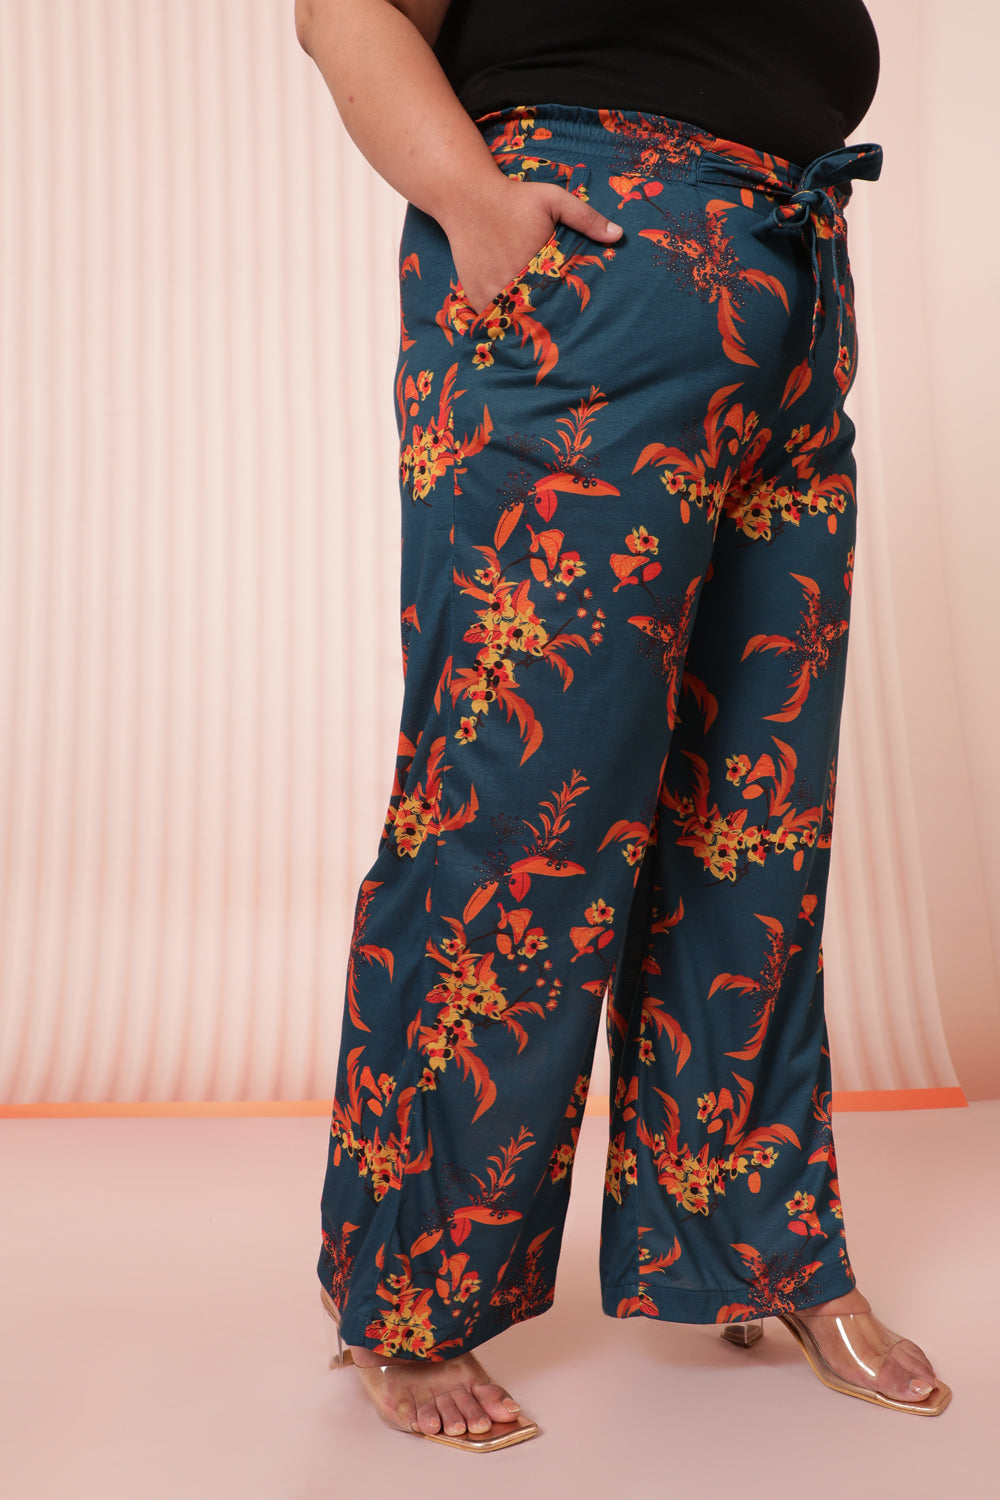 Teal Red Floral High Waist Pants for Women